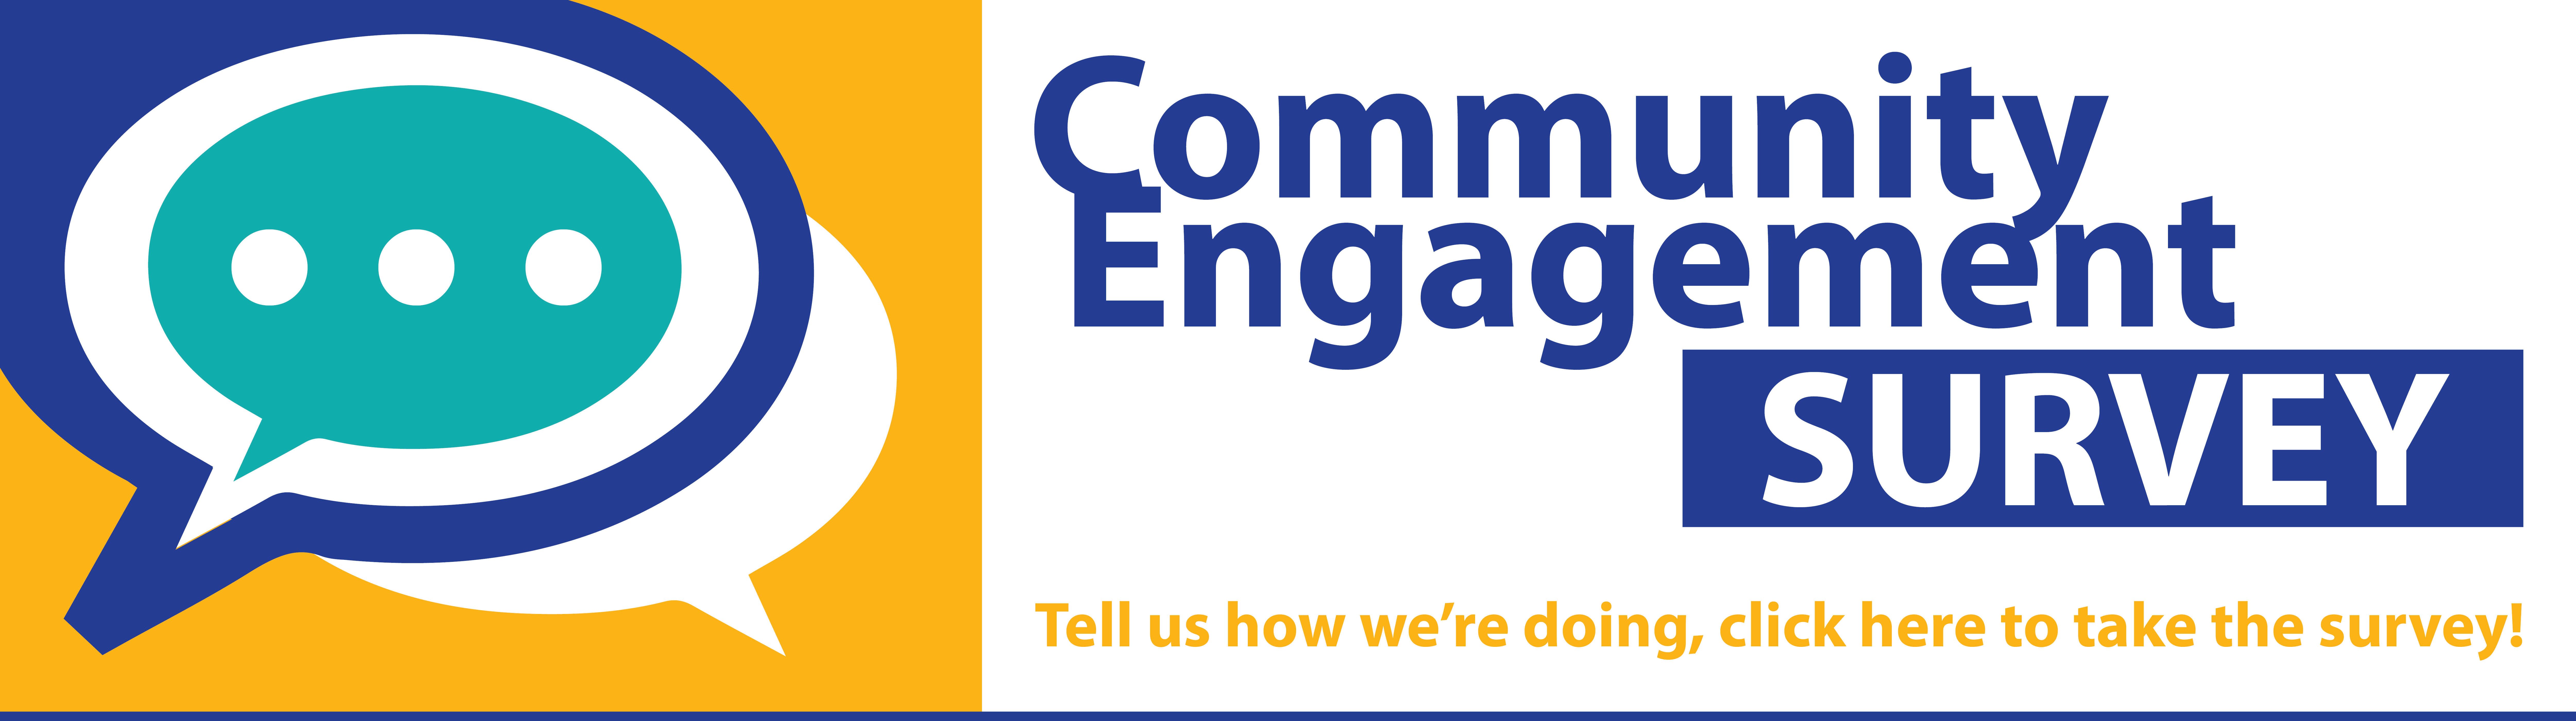 Community Engagement Survey 
Tell us how we're doing, click here to take the survey!